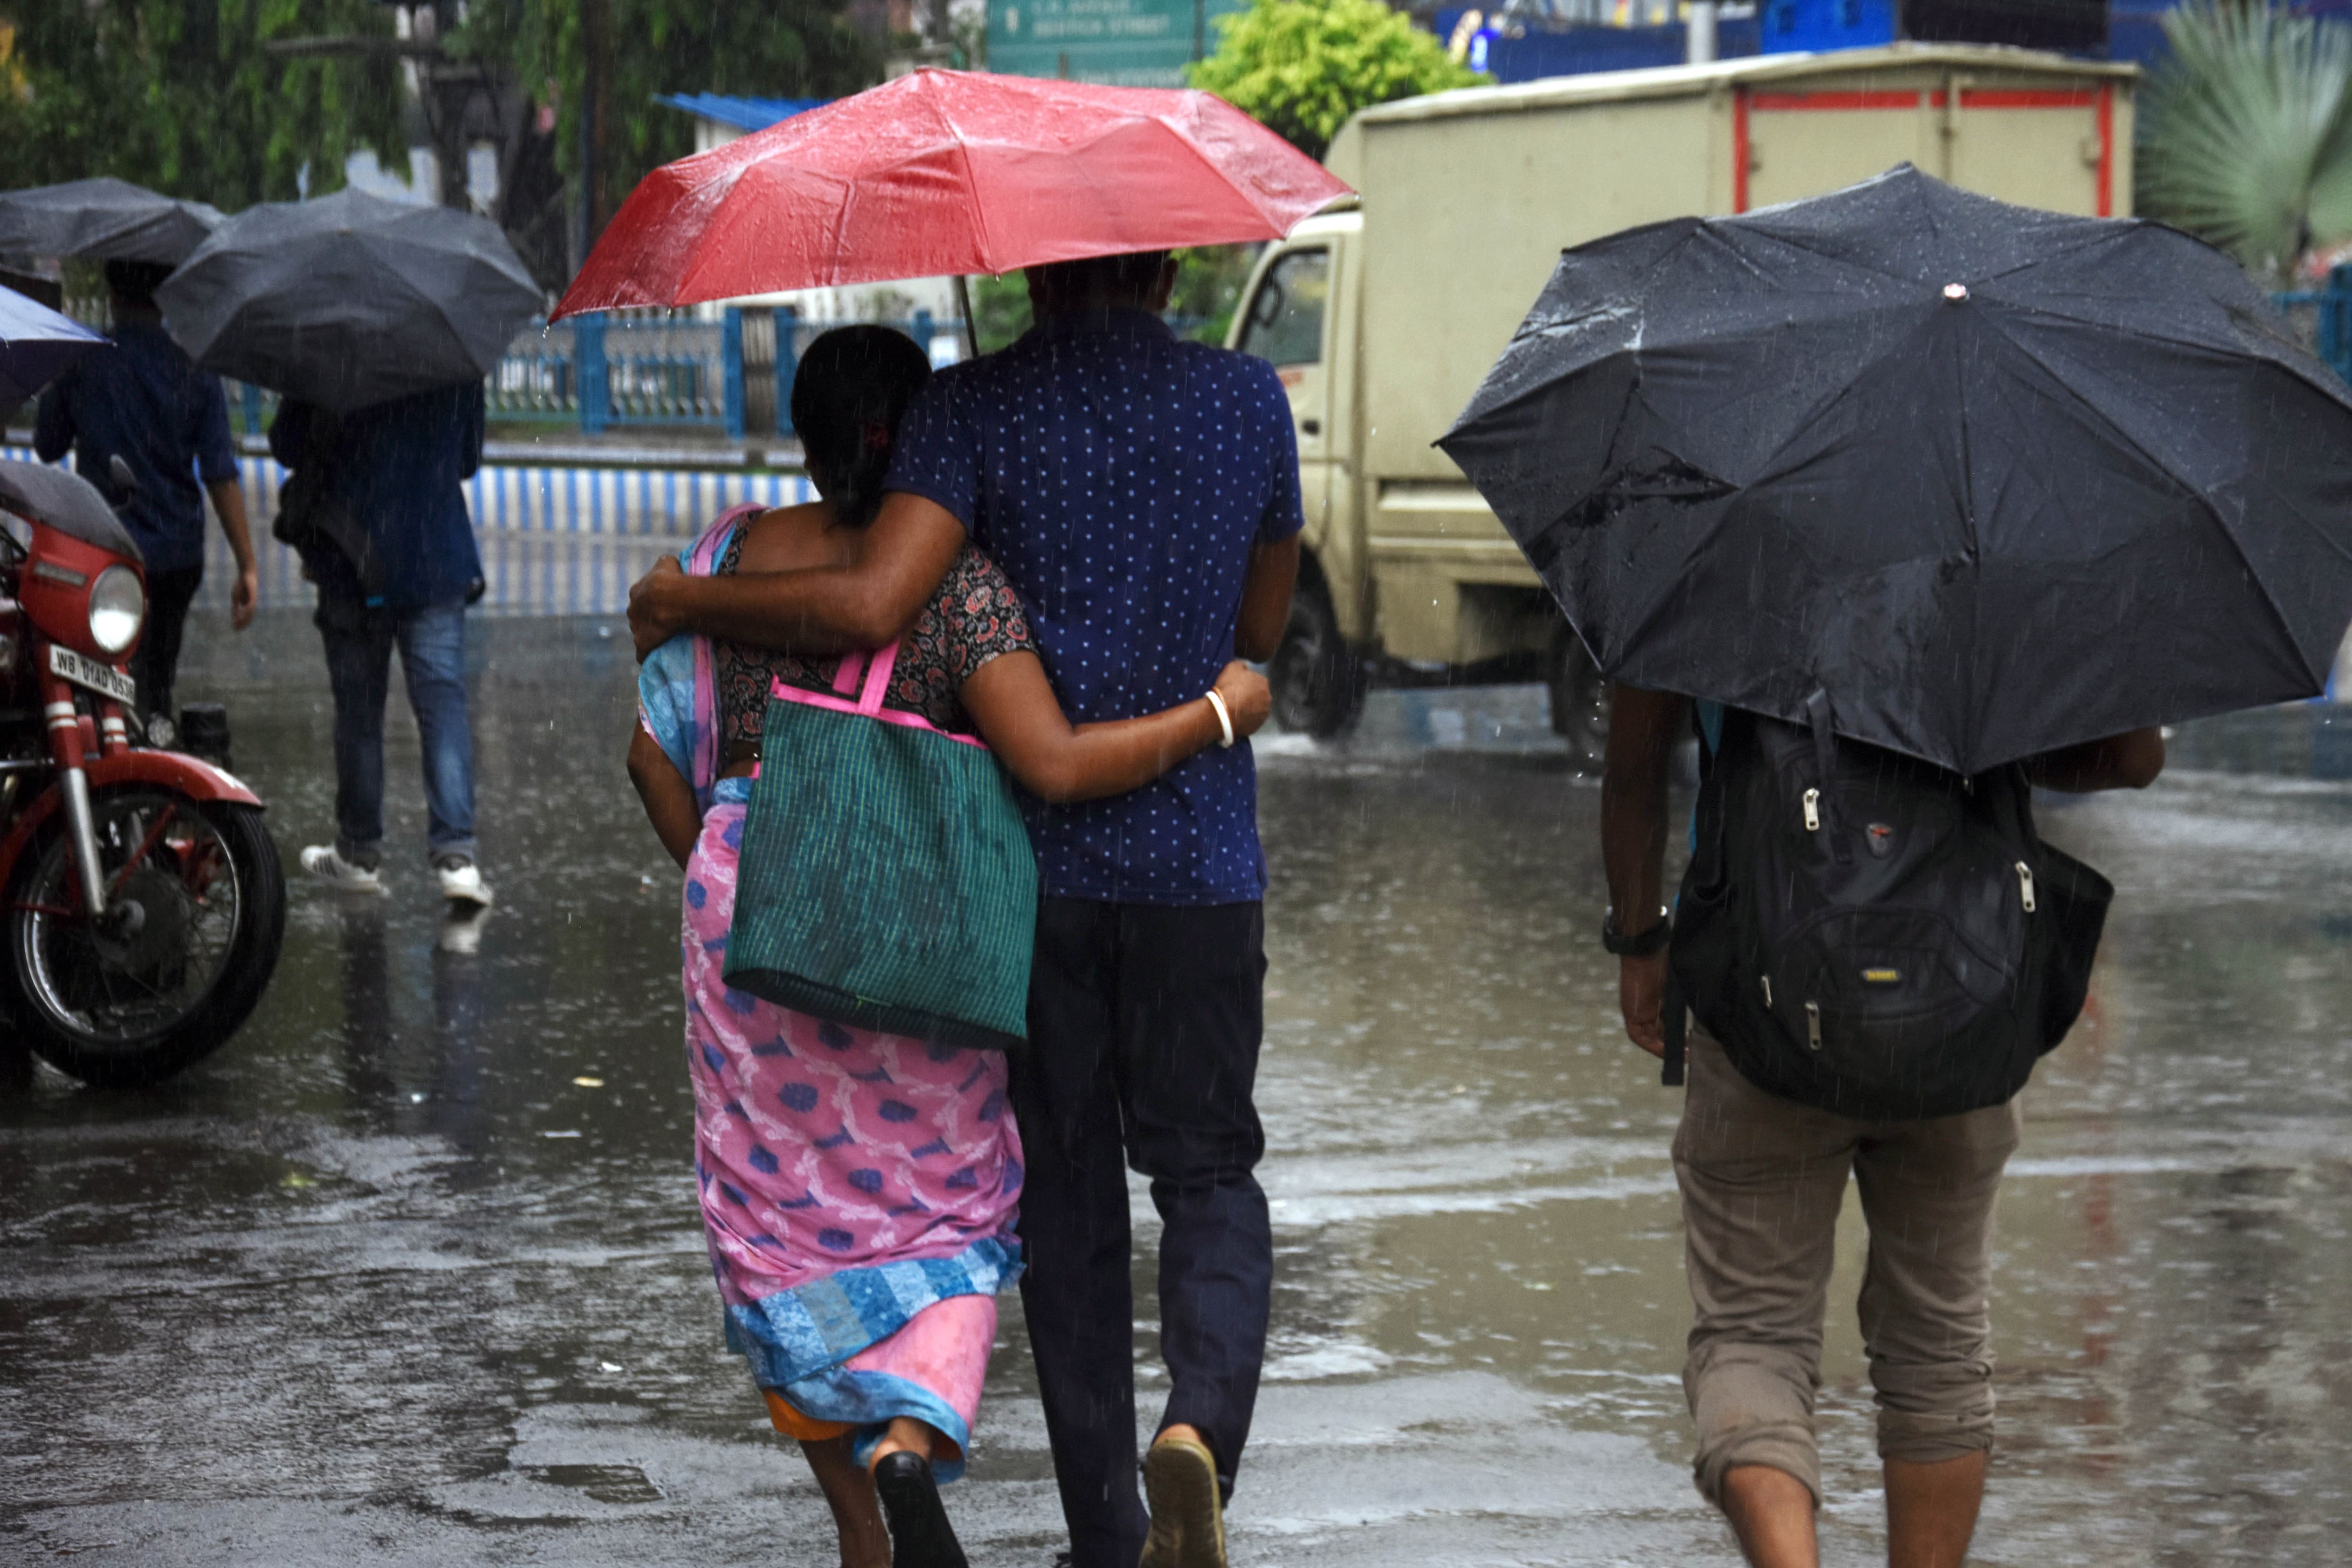 Weather Update: Heavy Rains To Hit Assam, Meghalaya In Next 2 Days, Says IMD 